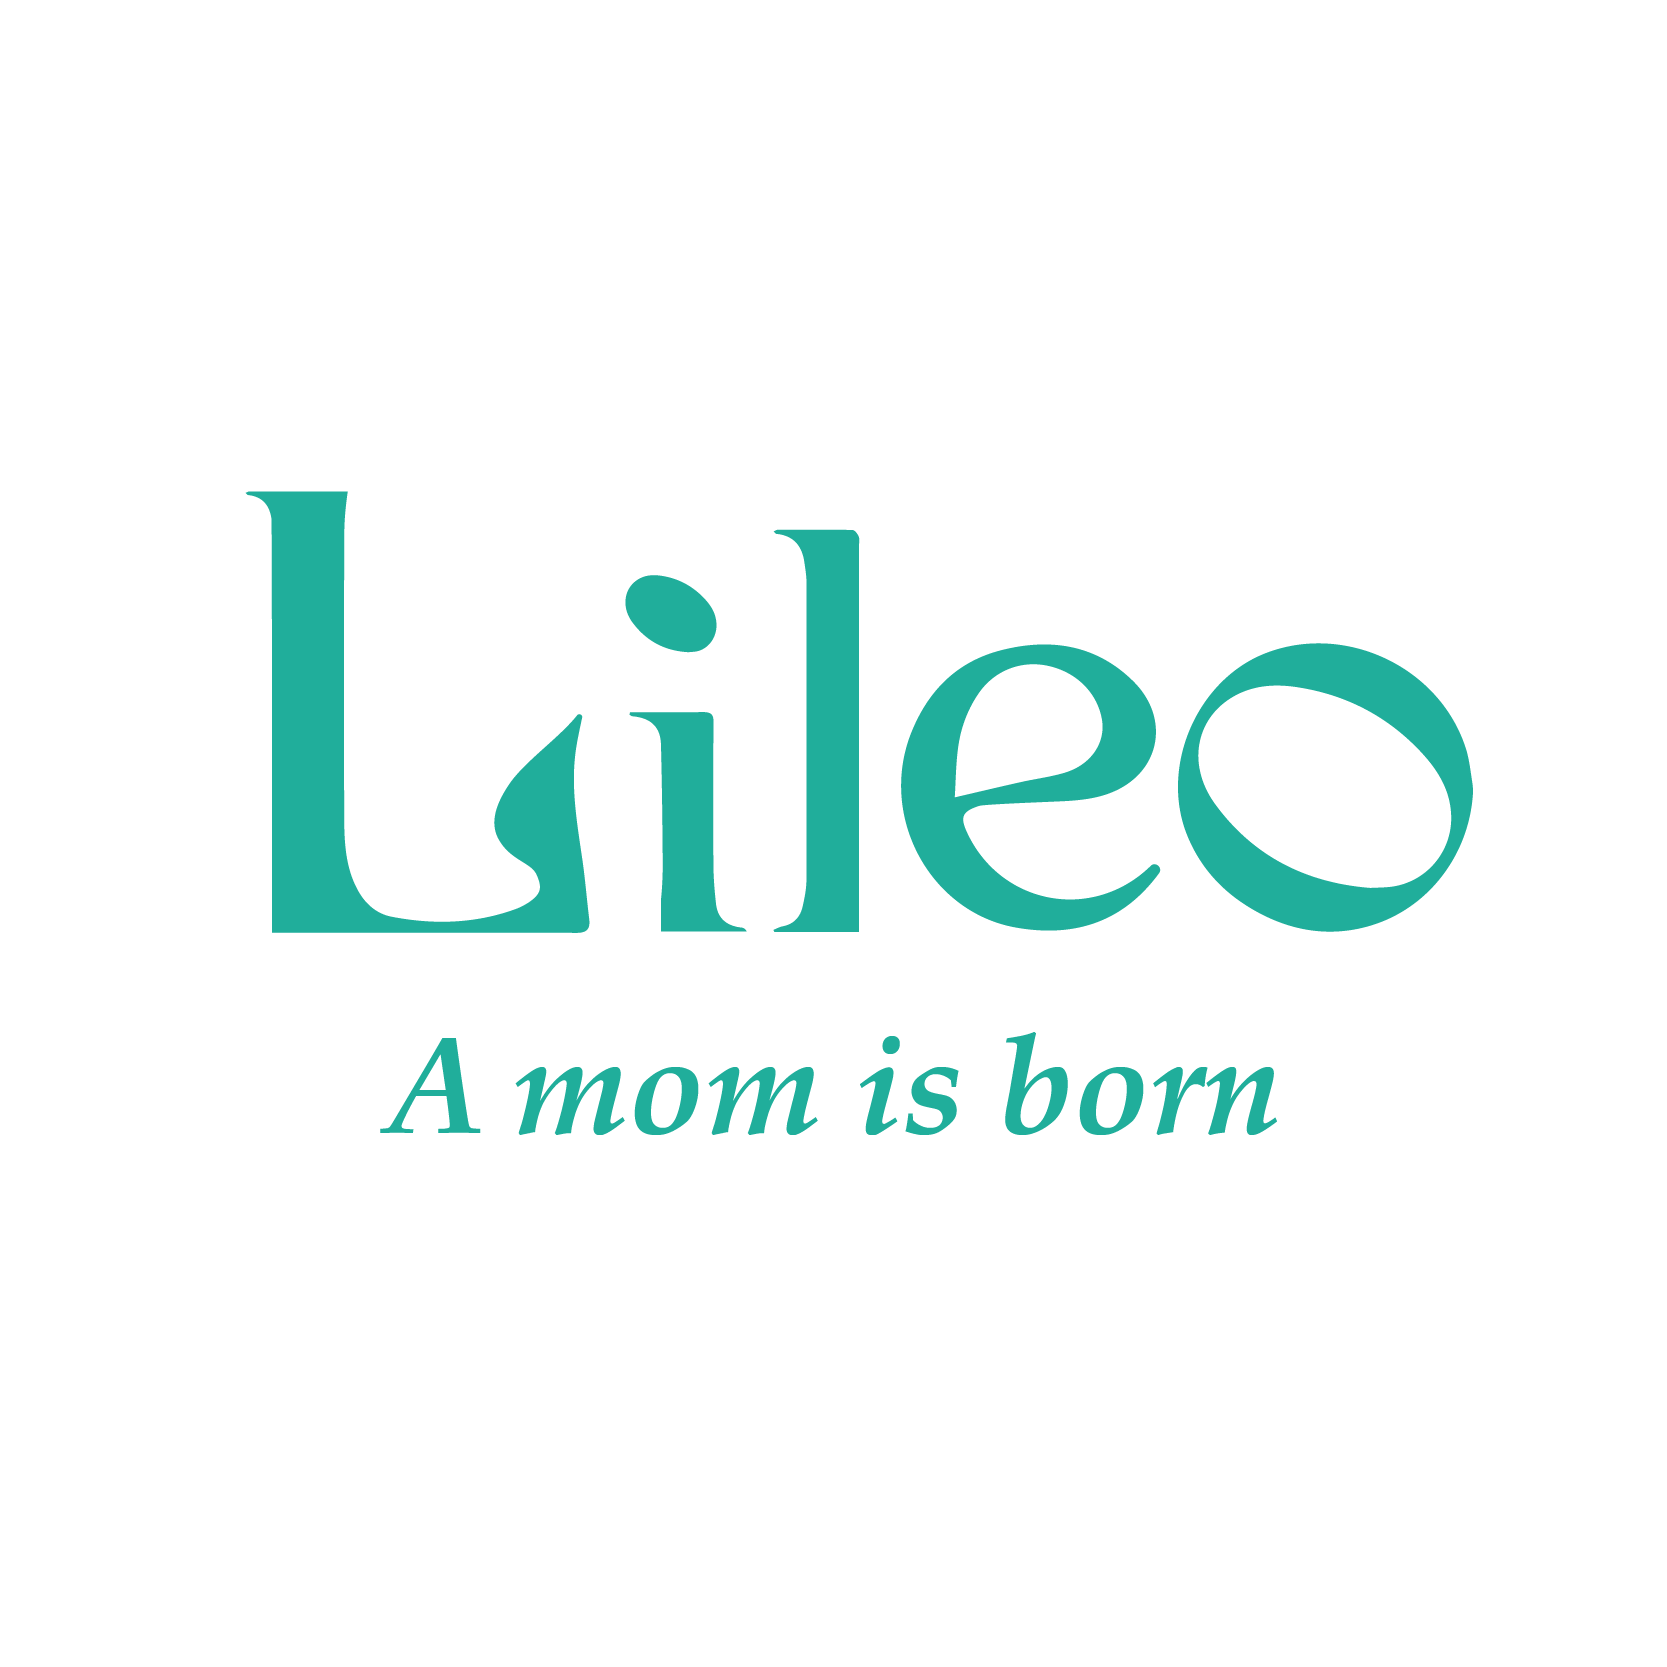 Lileo, taking care of mothers